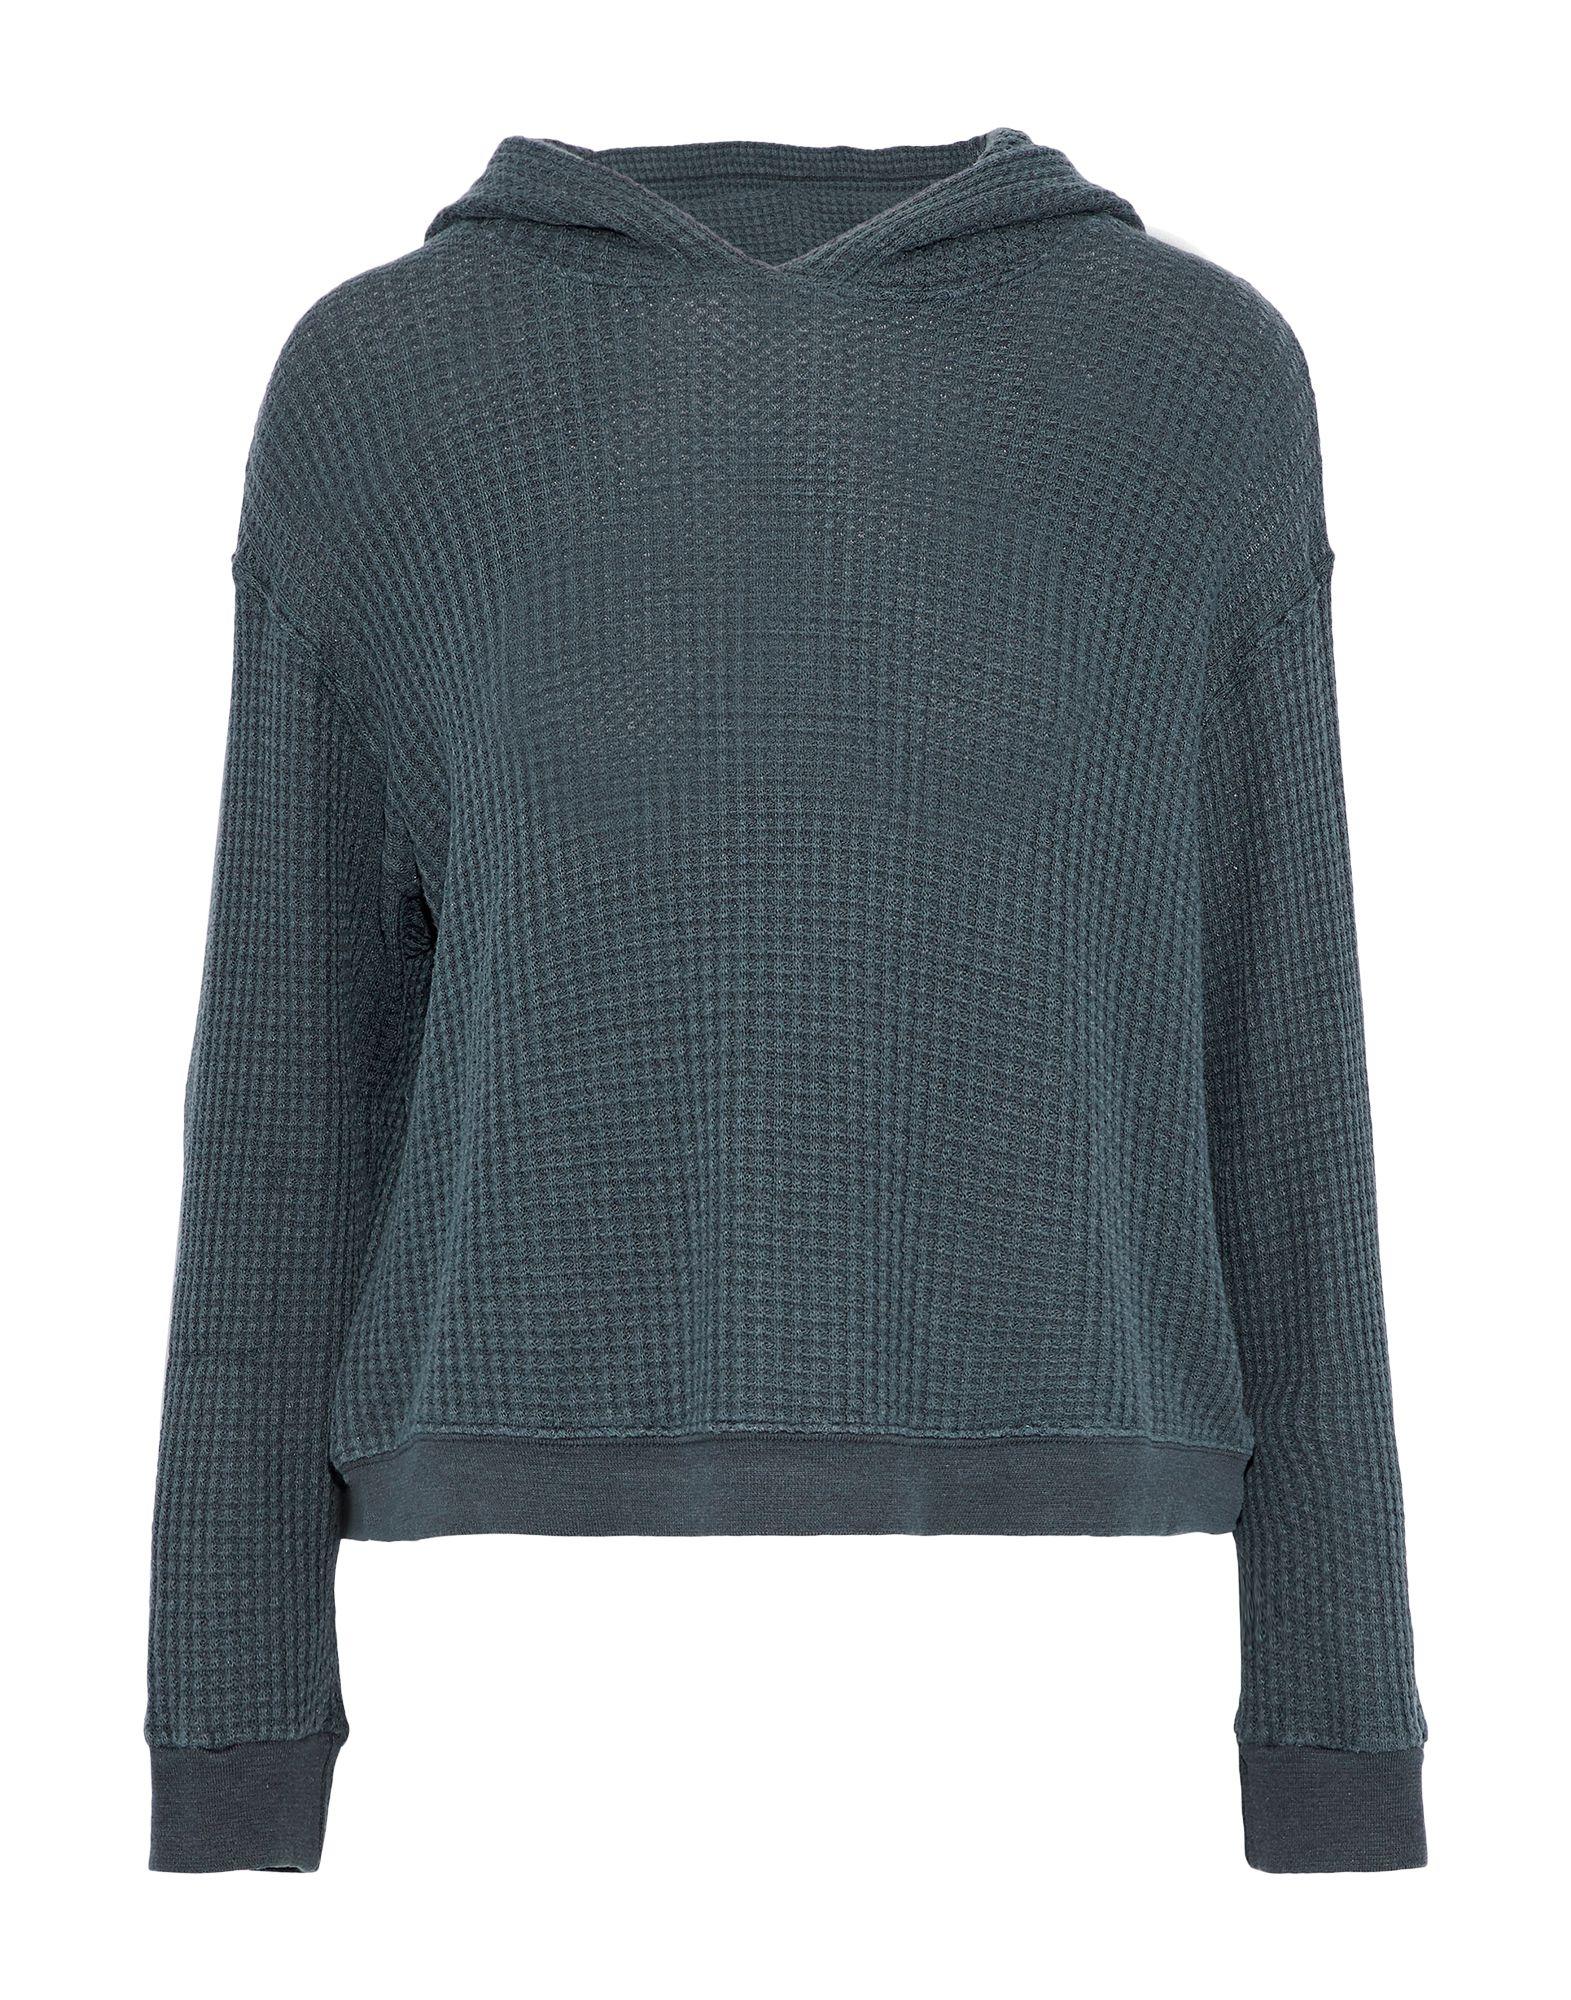 Monrow Sweater in Gray - Lyst